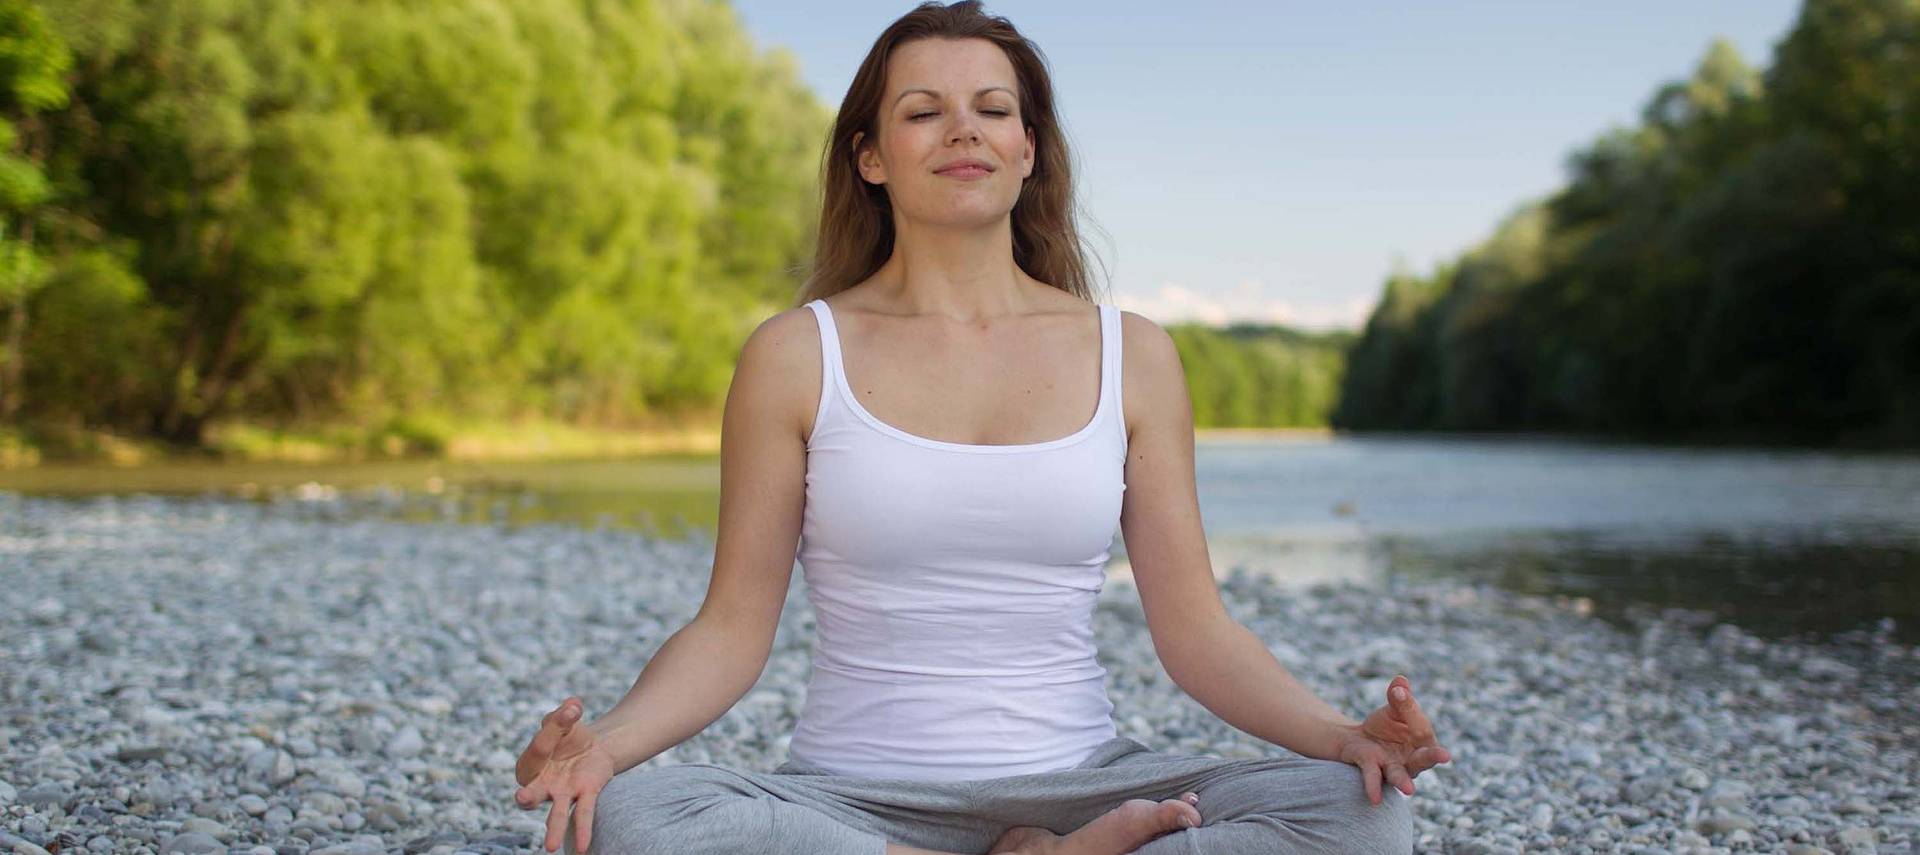 woman in a yoga pose